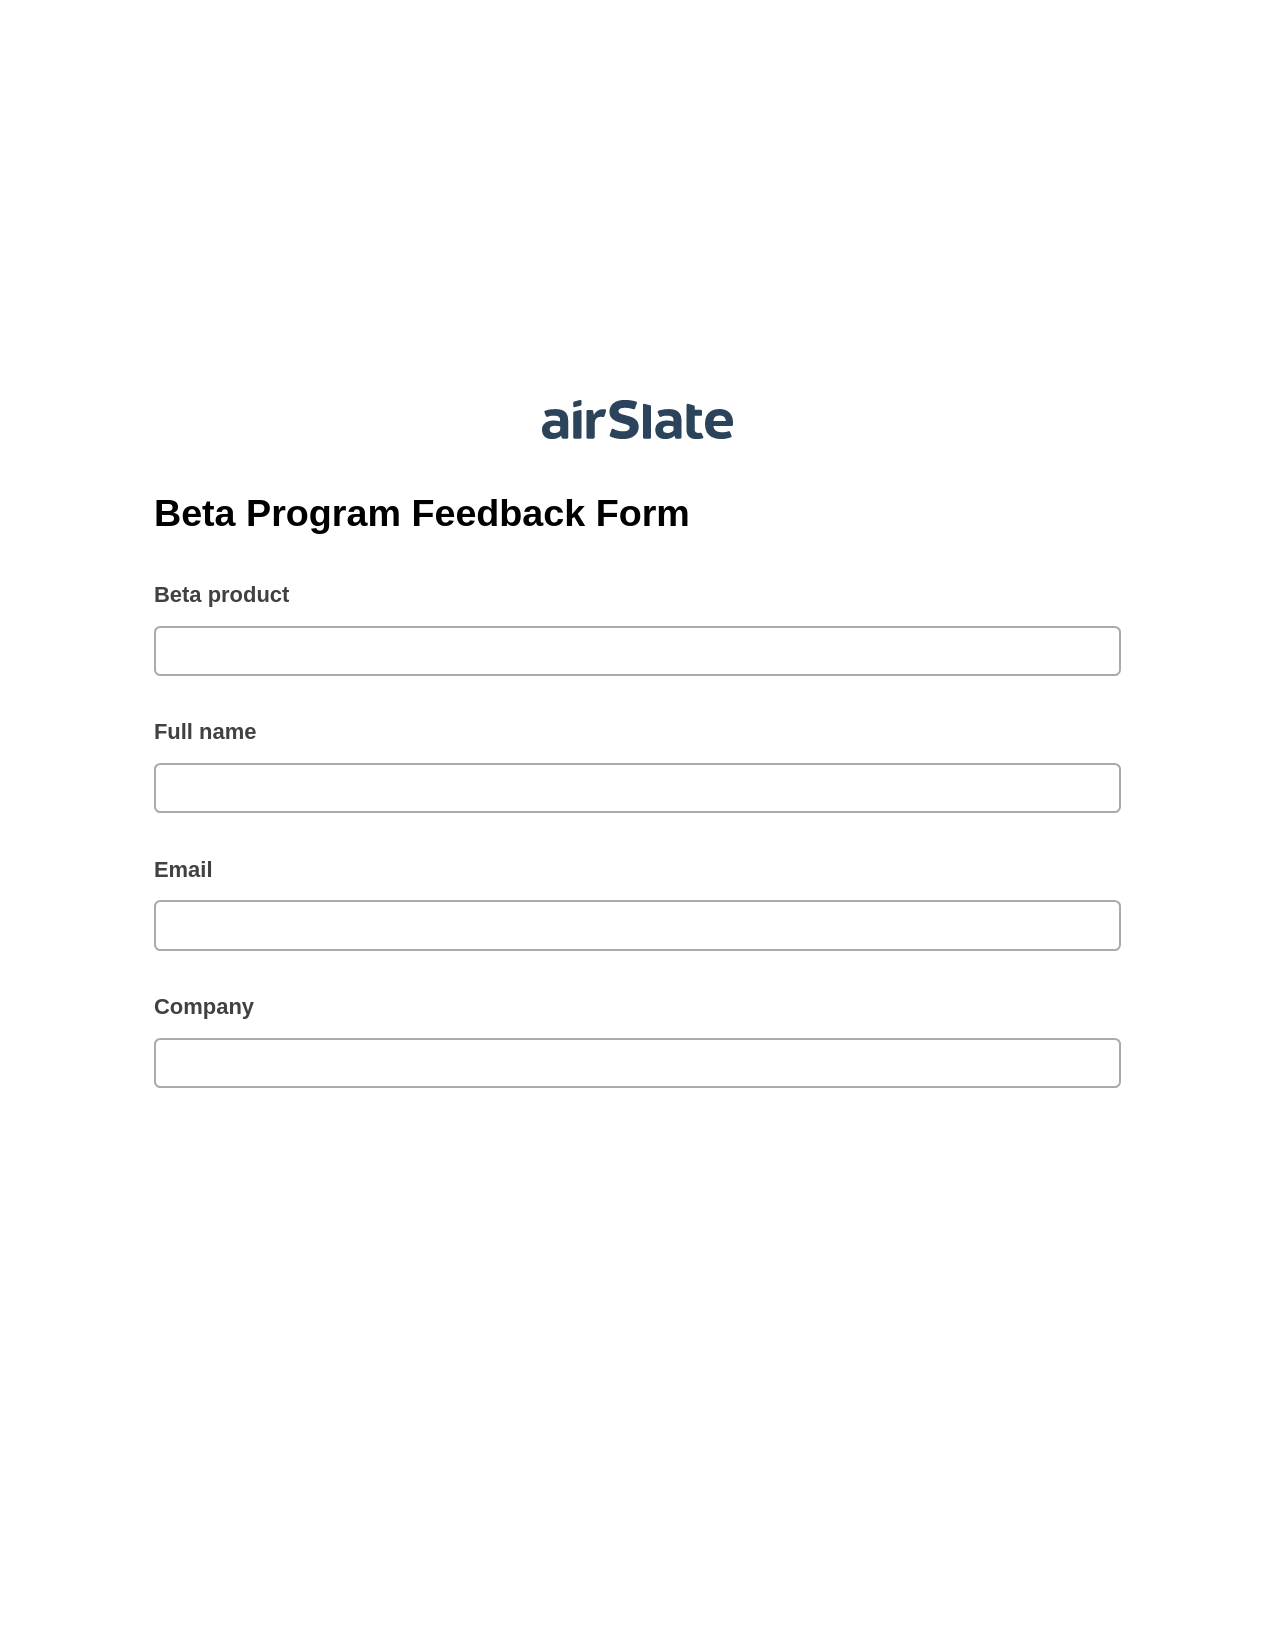 Beta Program Feedback Form Pre-fill Document Bot, Add Tags to Slate Bot, Export to Salesforce Bot